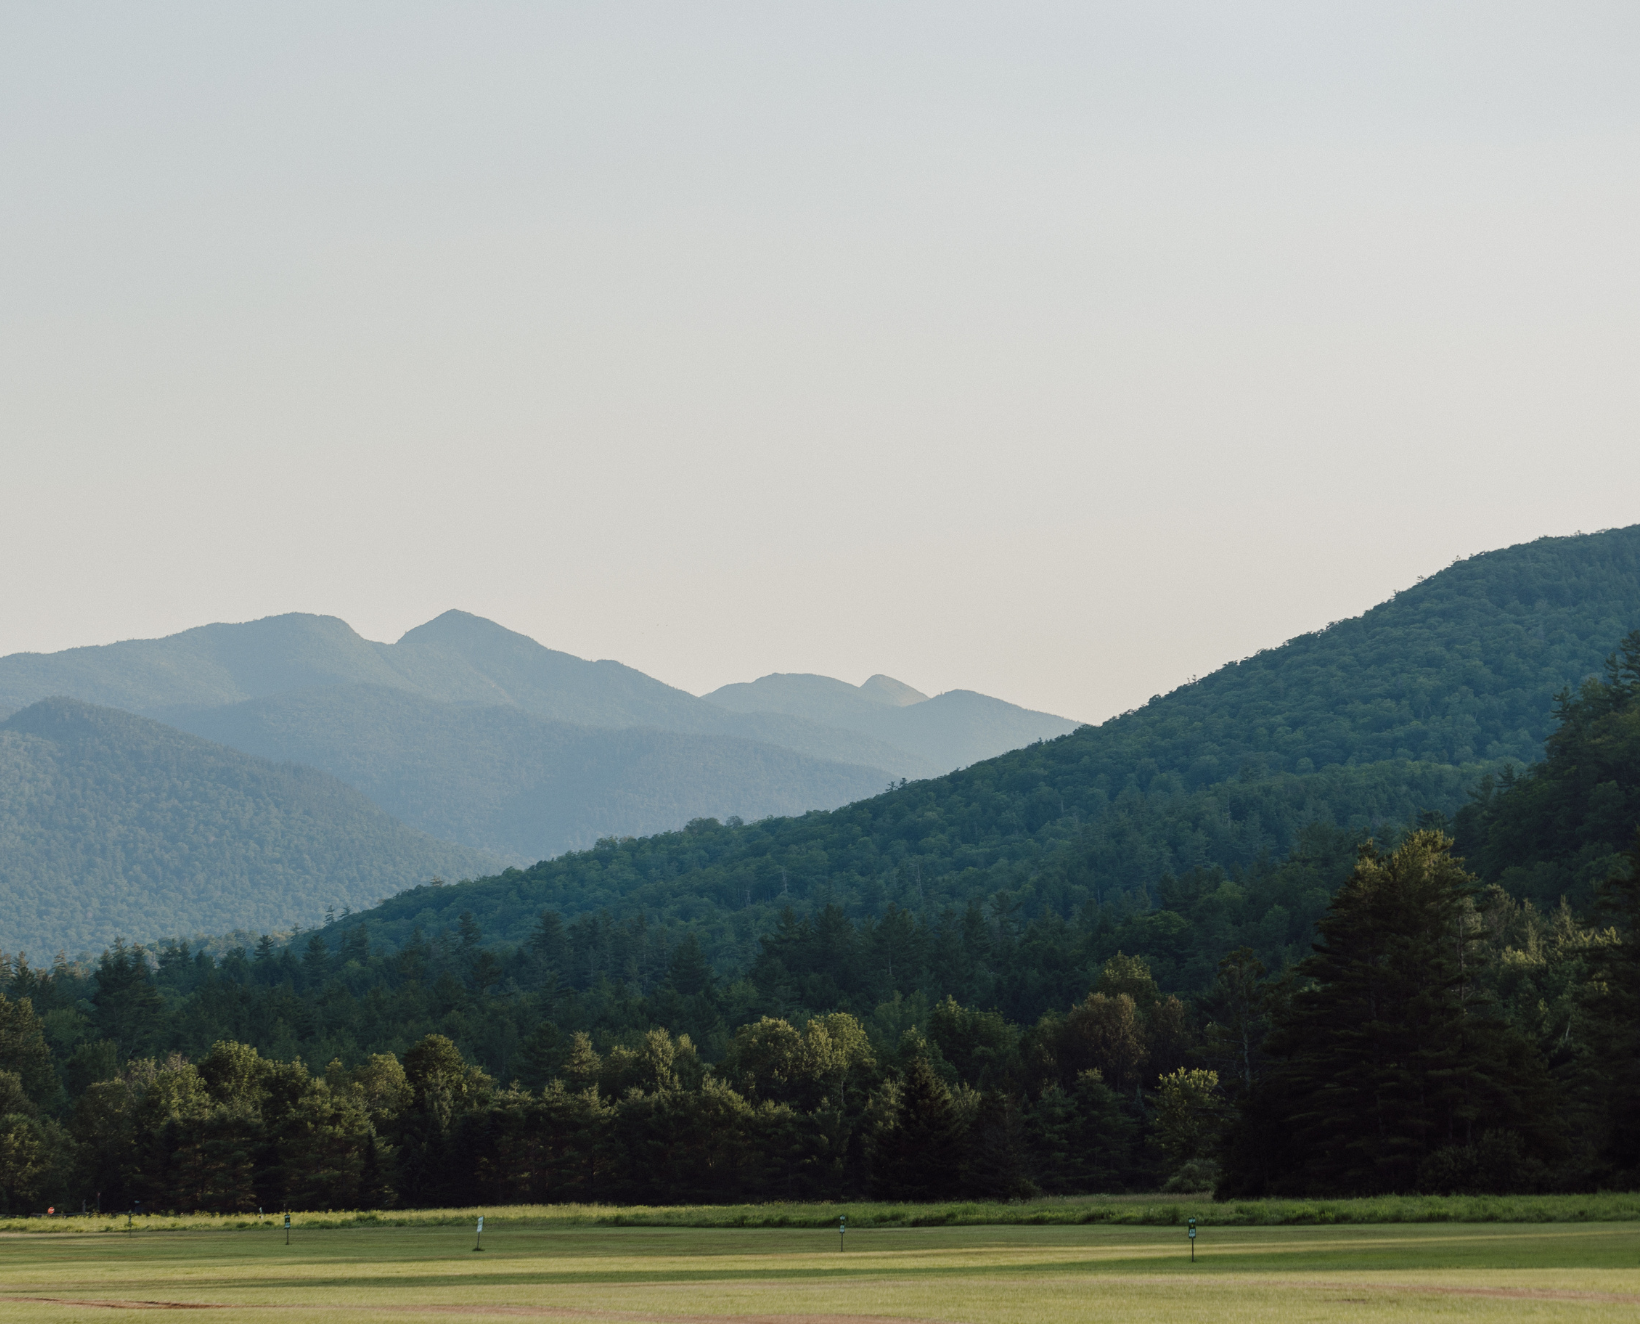 A professional photo of the woodsy Adirondack Mountains taken by Rebecca Loomis | Rebecca Loomis Photography for Weddings and Branding